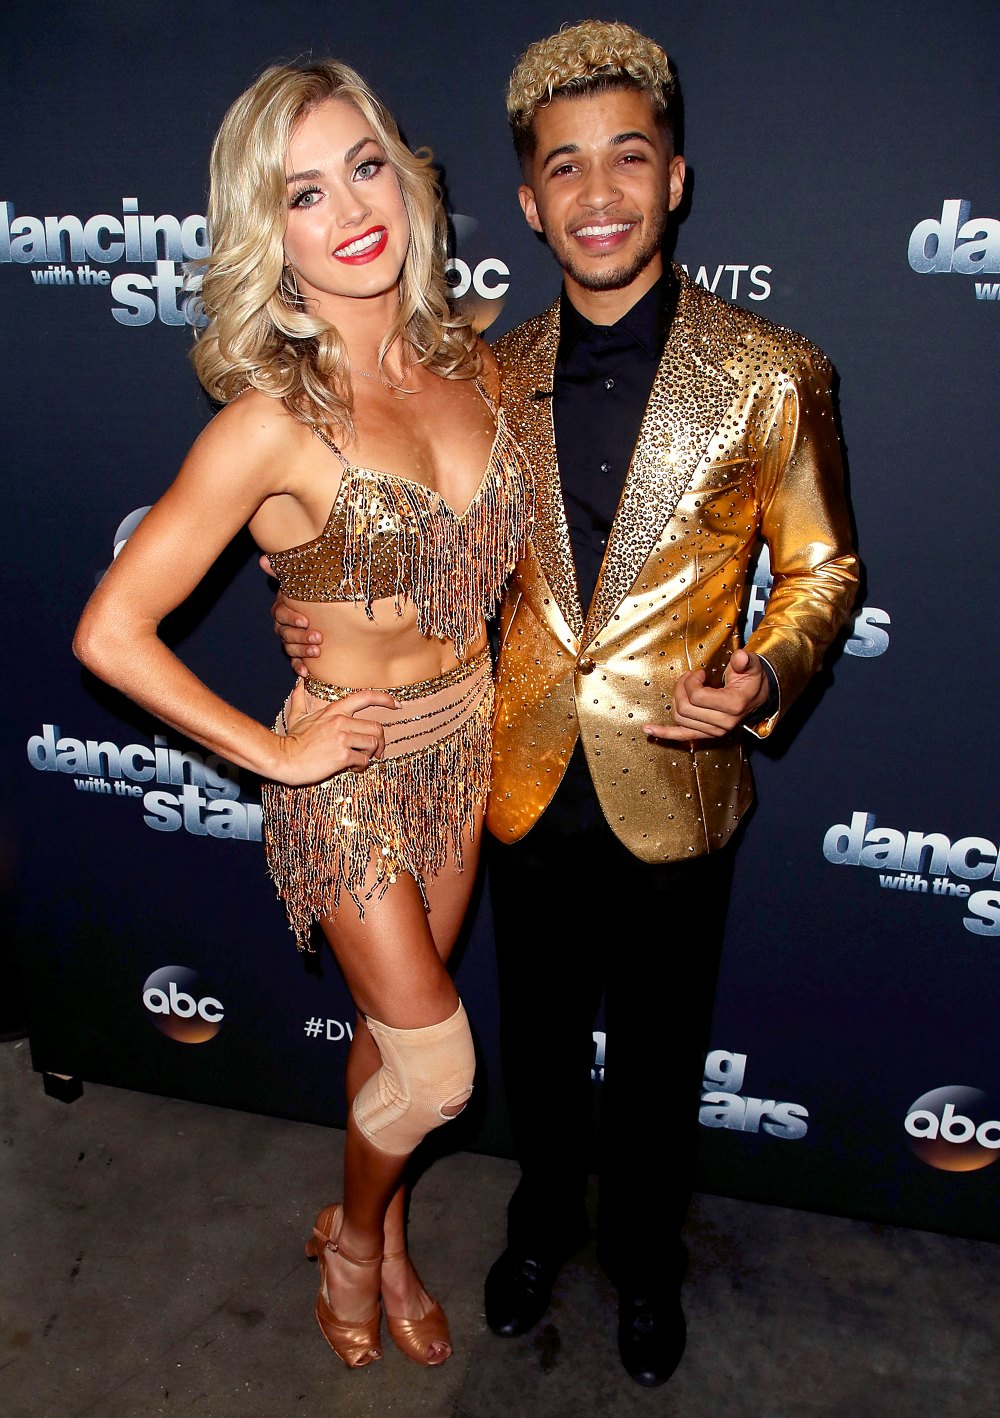 Jordan Fisher and Lindsay Arnold pose at "Dancing with the Stars" season 25 at CBS Televison City on November 13, 2017 in Los Angeles, California.